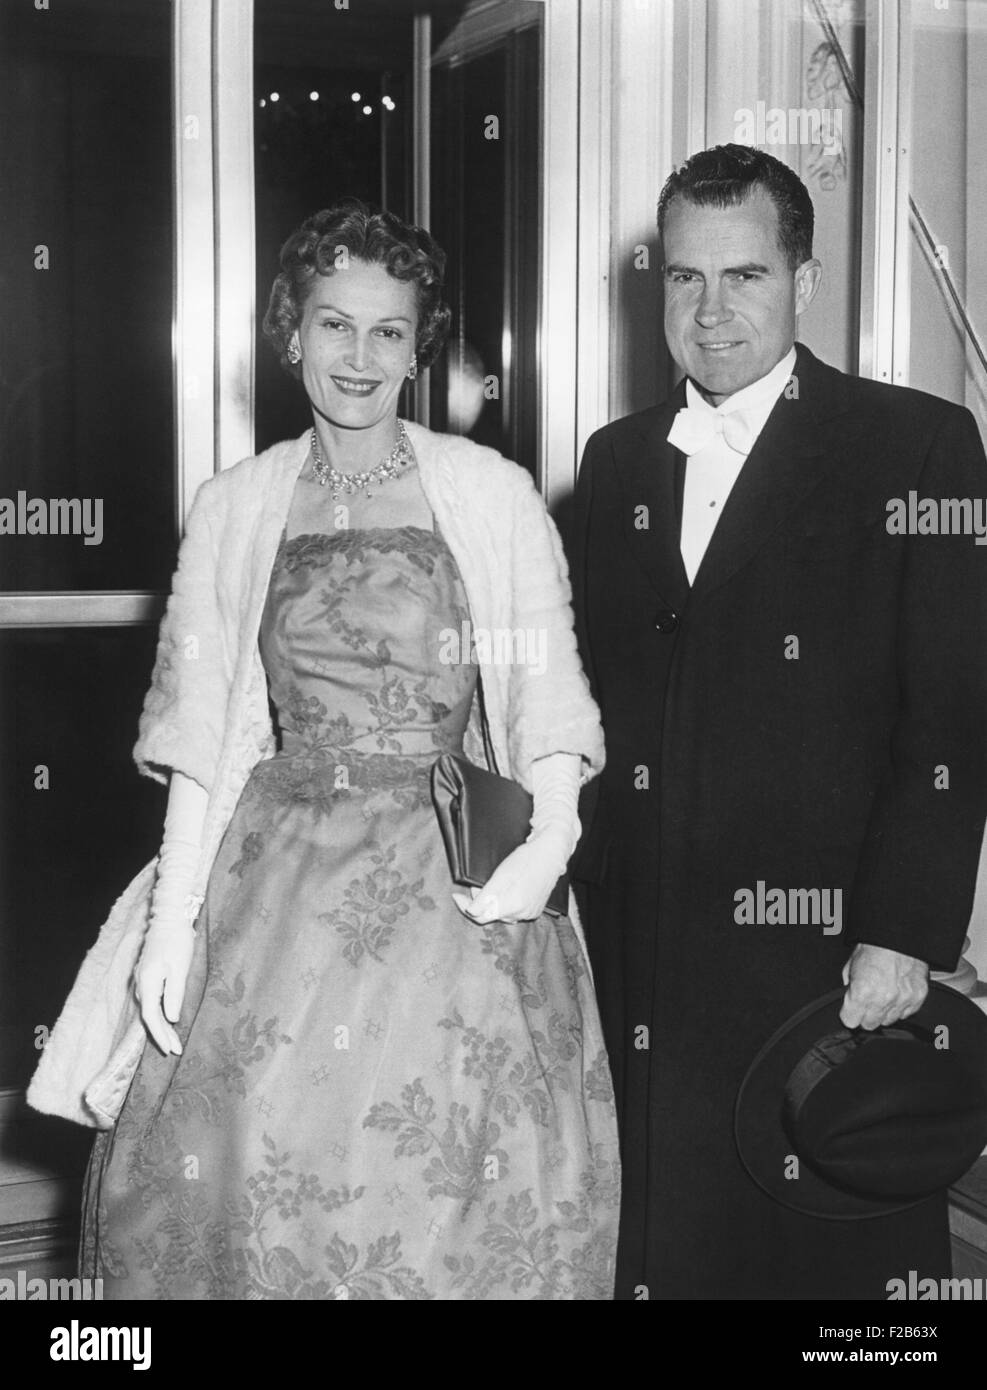 Vice President Richard Nixon with wife Patricia arriving at a state dinner for Queen Elizabeth II. Oct 17, 1957. - (BSLOC 2014 16 141) Stock Photo